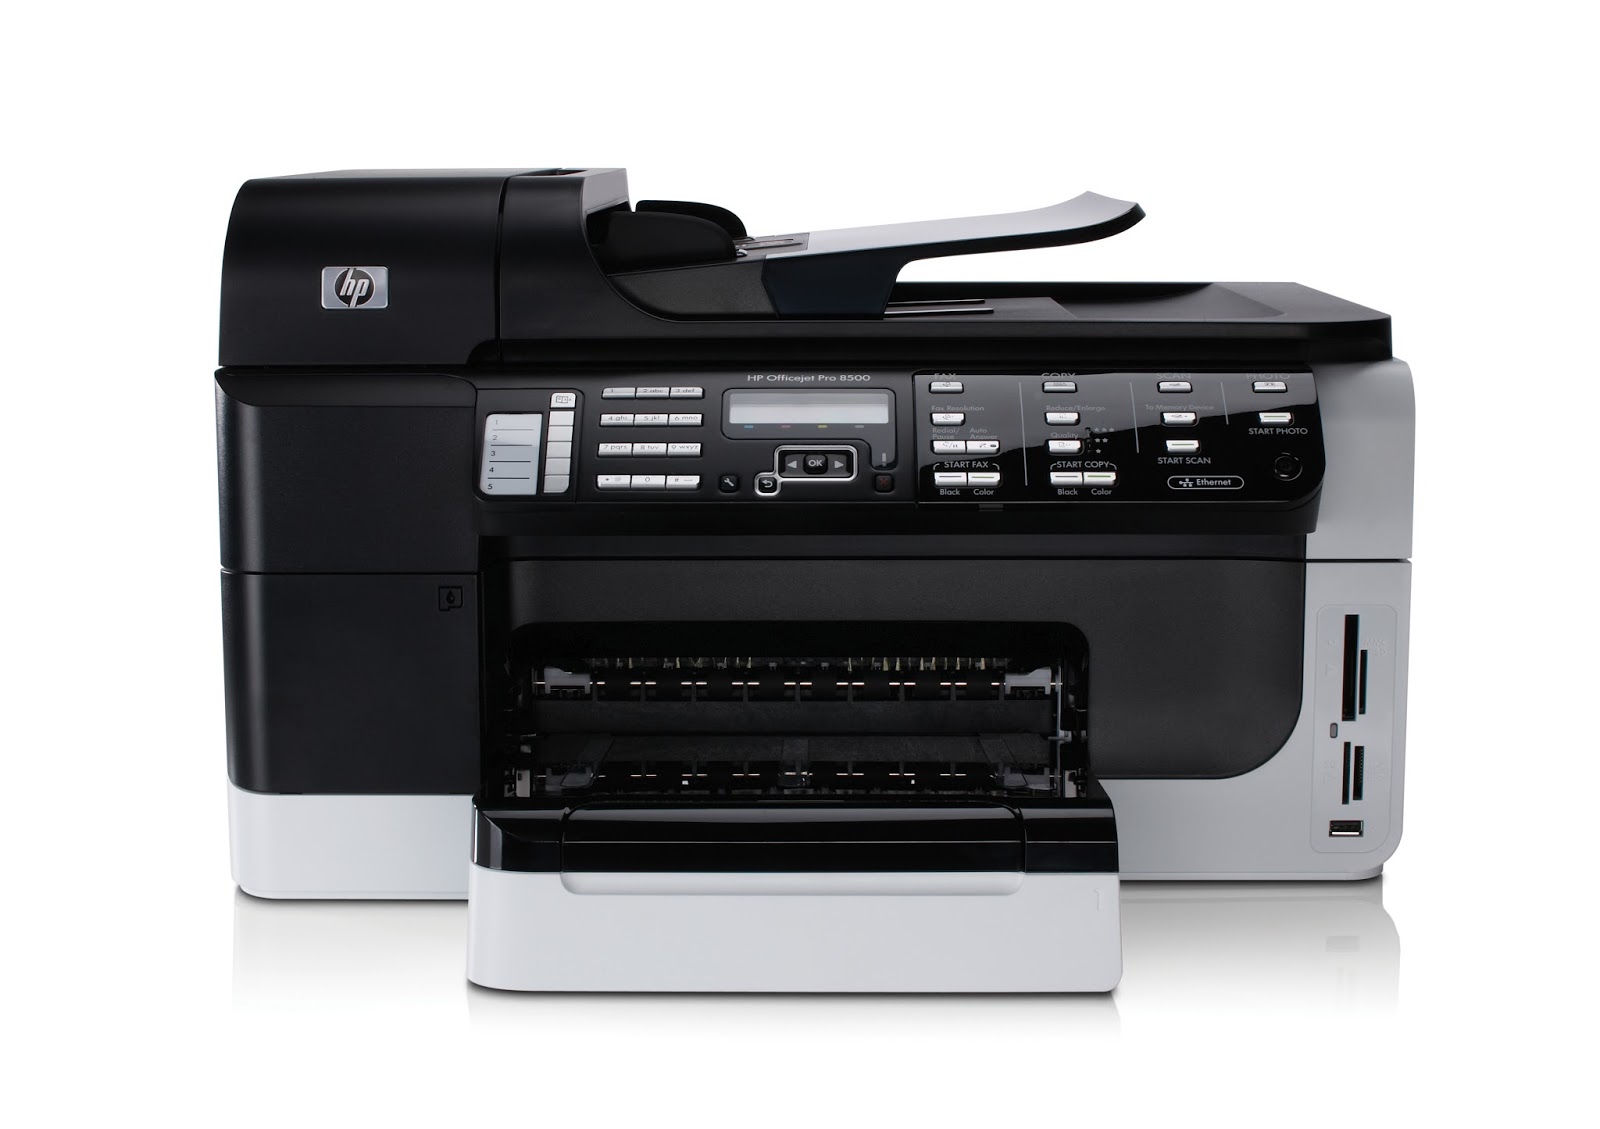 hp officejet 8600 driver for mac 10.10